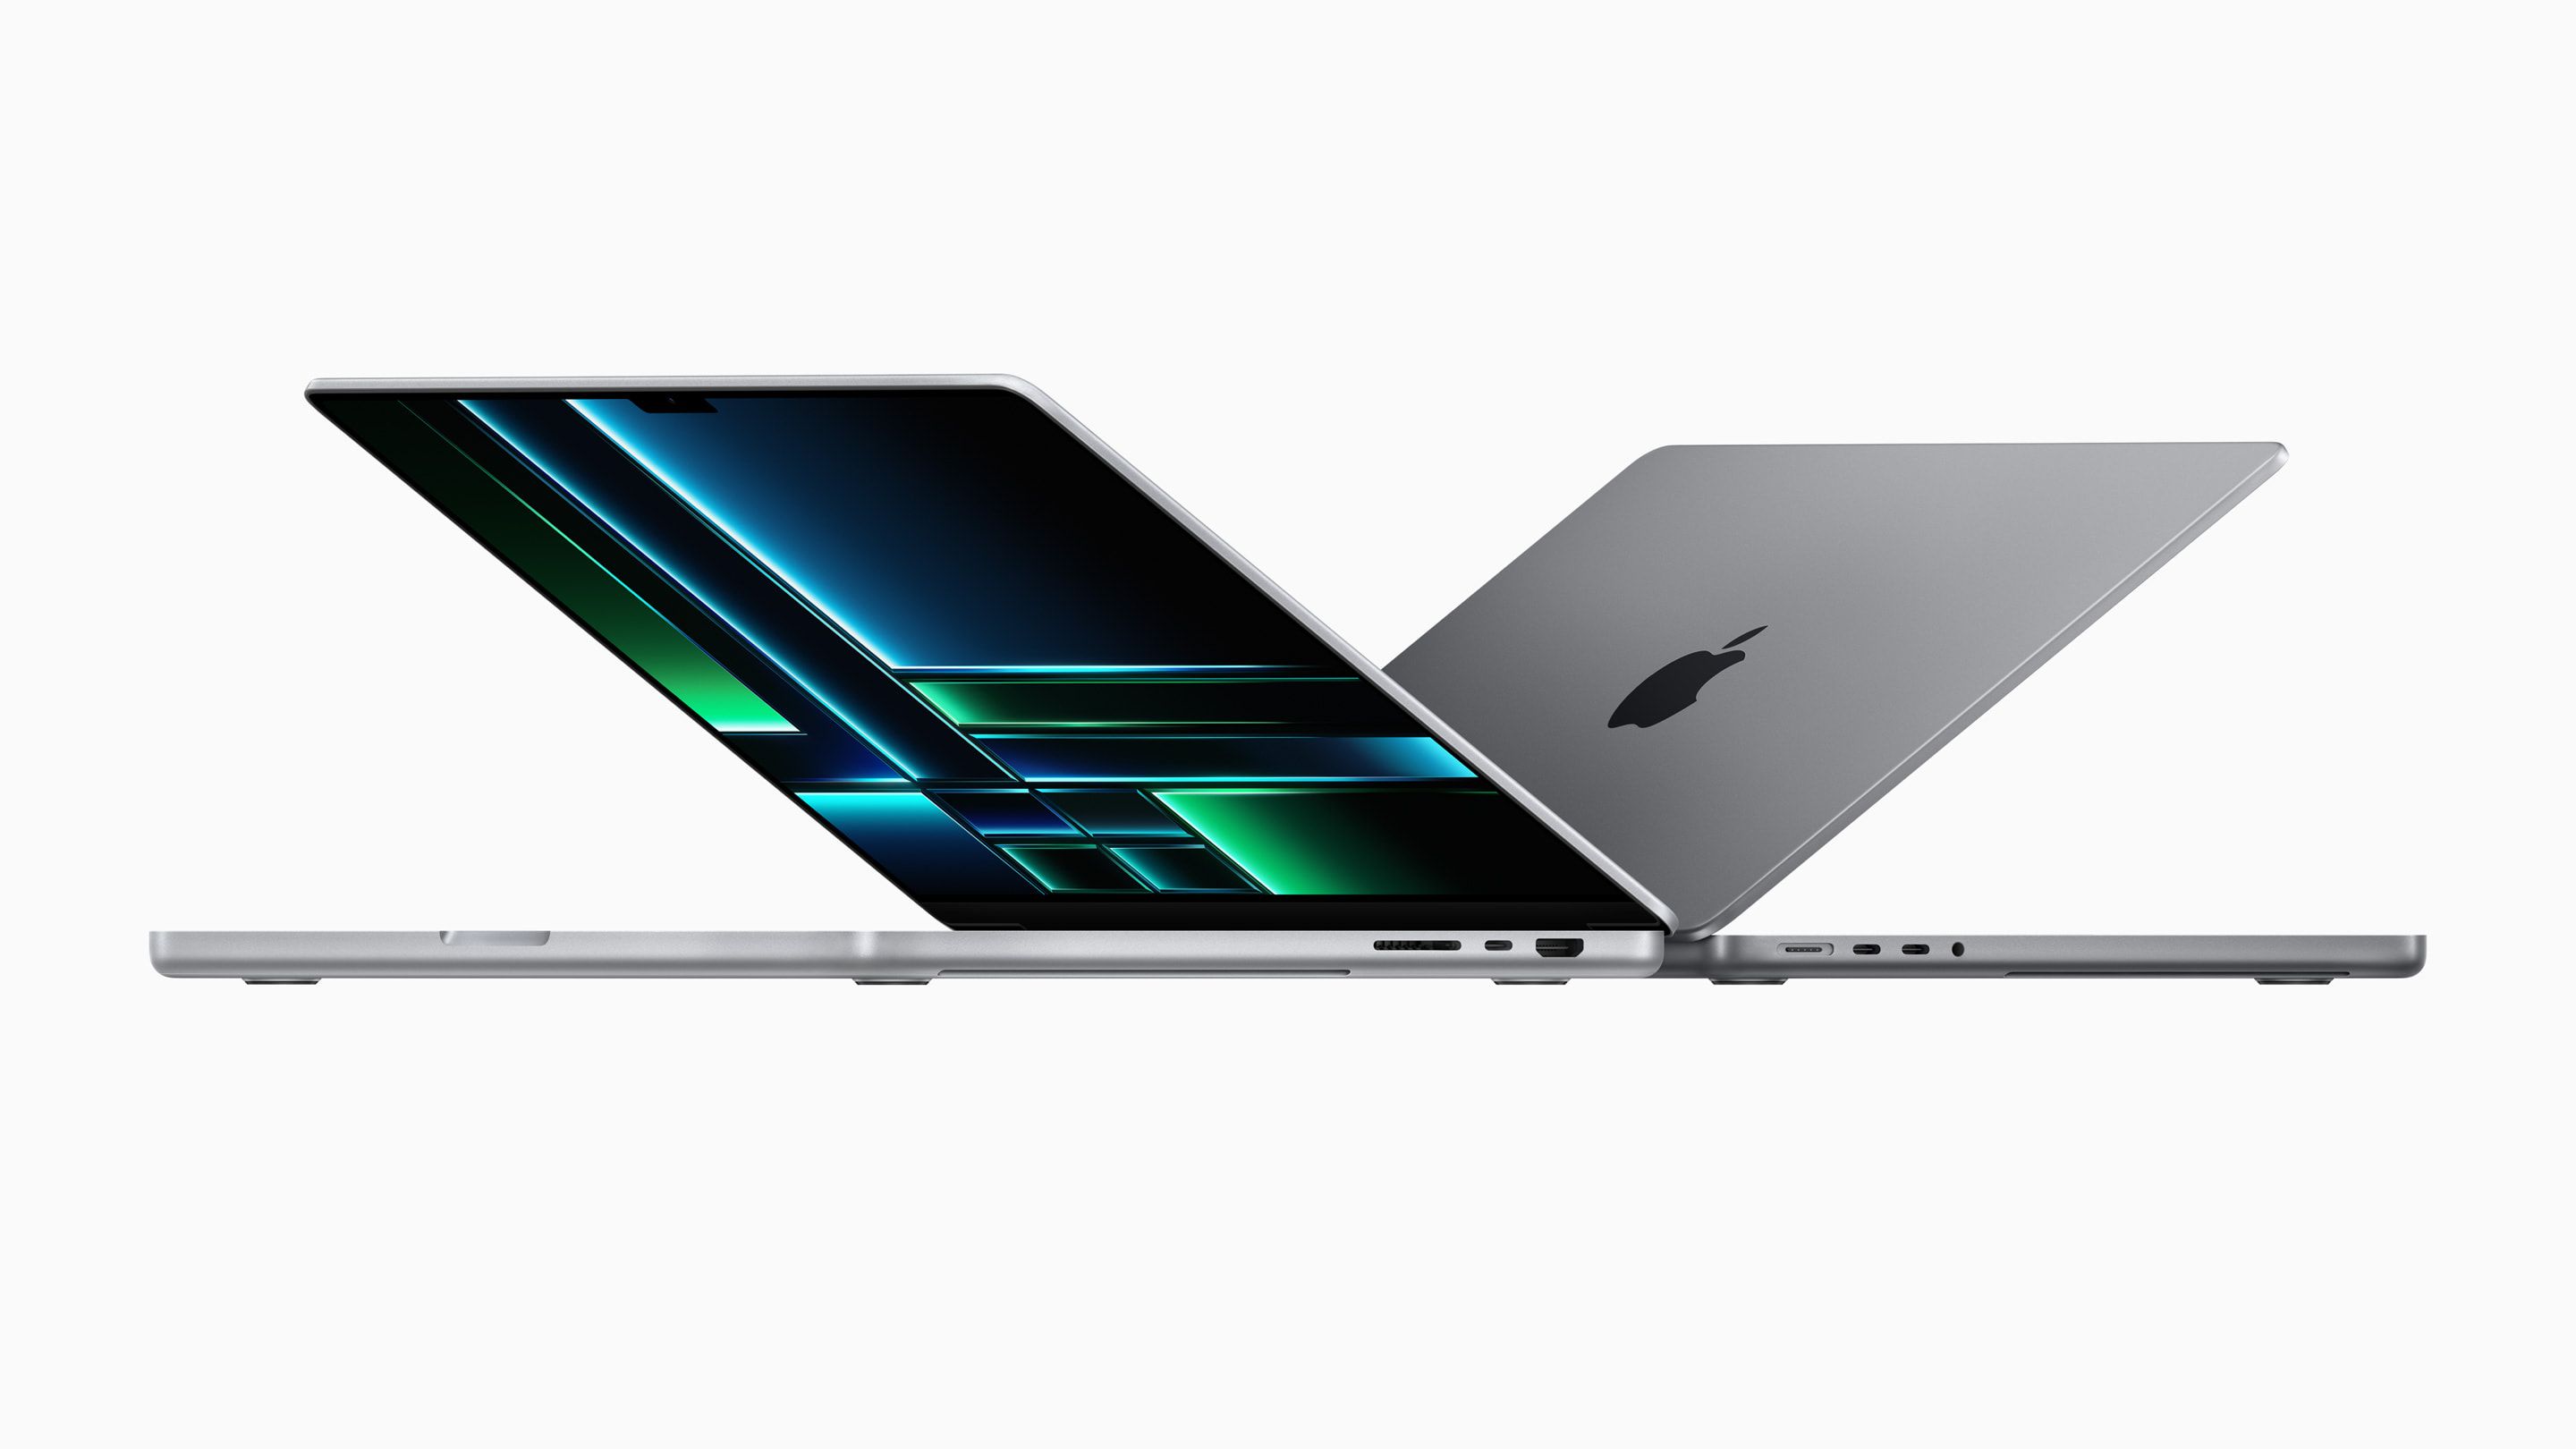 The MacBook Pro open with screens back to back and side by side.